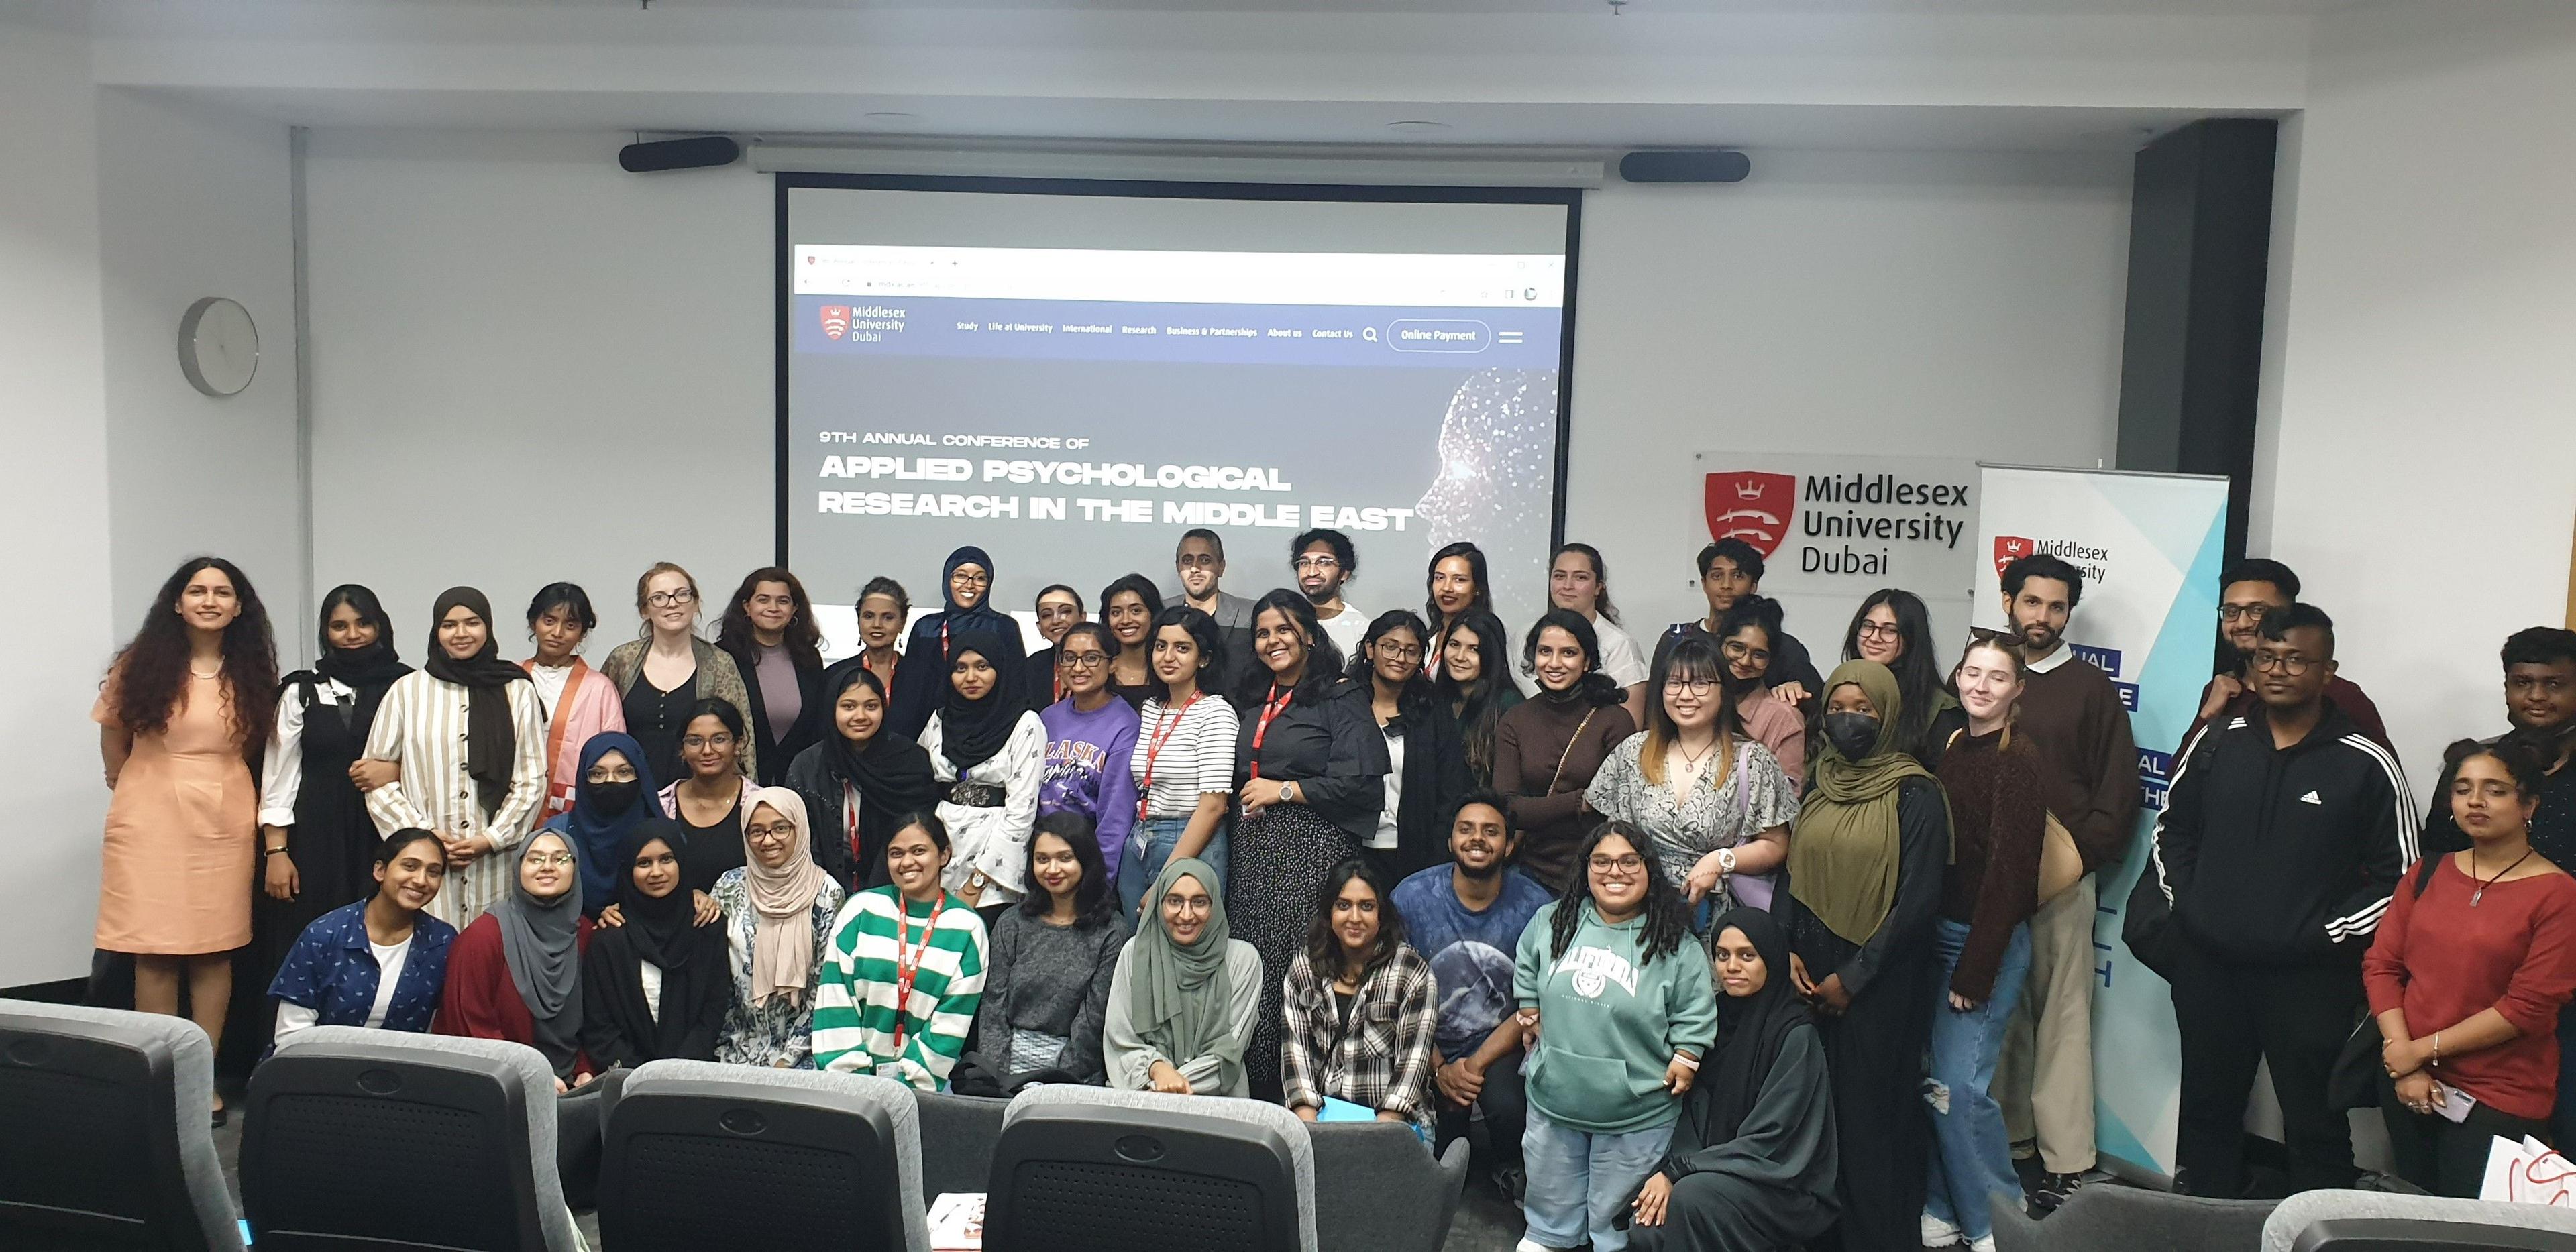 The 9th Annual Conference of Applied Psychological Research in the Middle East led by our Psychology Department was held on 17th November, focusing on the theme of ‘Global Mental Health’.